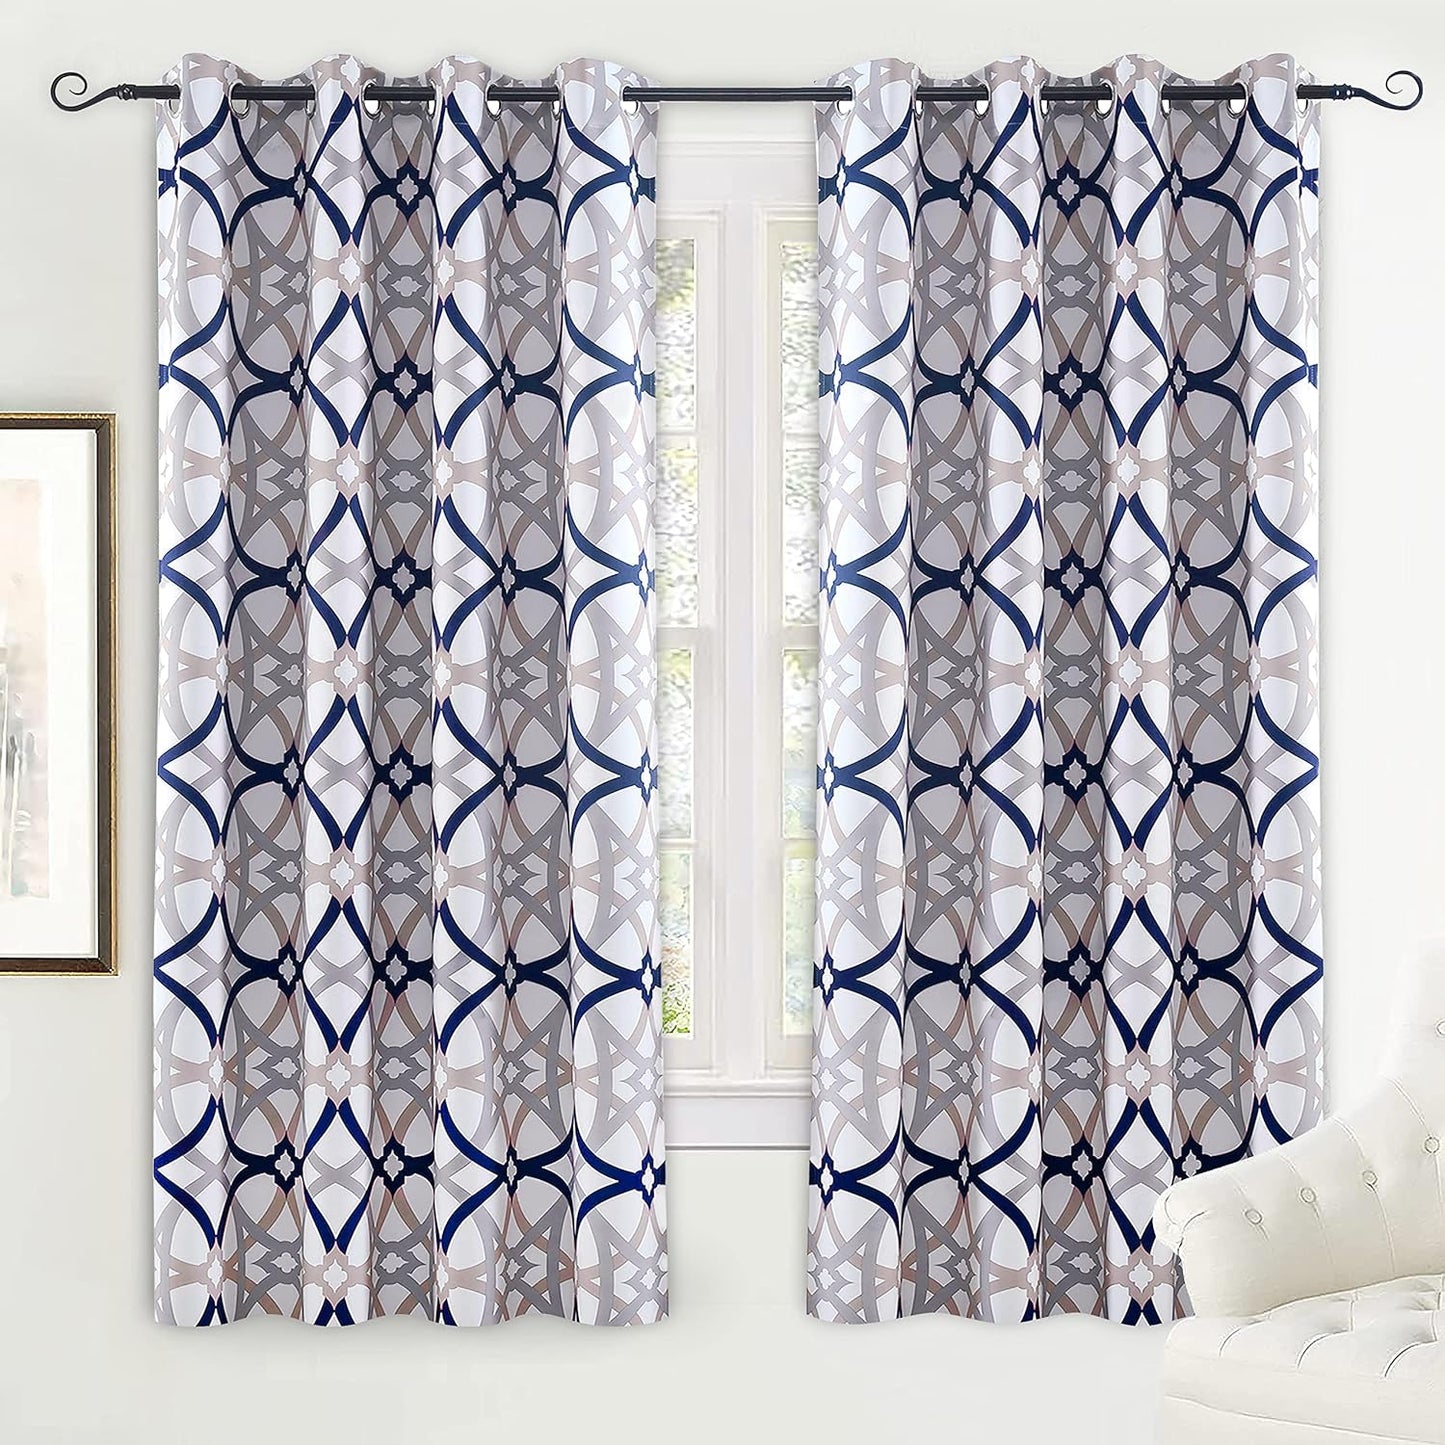 Driftaway Alexander Thermal Blackout Grommet Unlined Window Curtains Spiral Geo Trellis Pattern Set of 2 Panels Each Size 52 Inch by 84 Inch Red and Gray  DriftAway Navy/Gray 52"X72" 